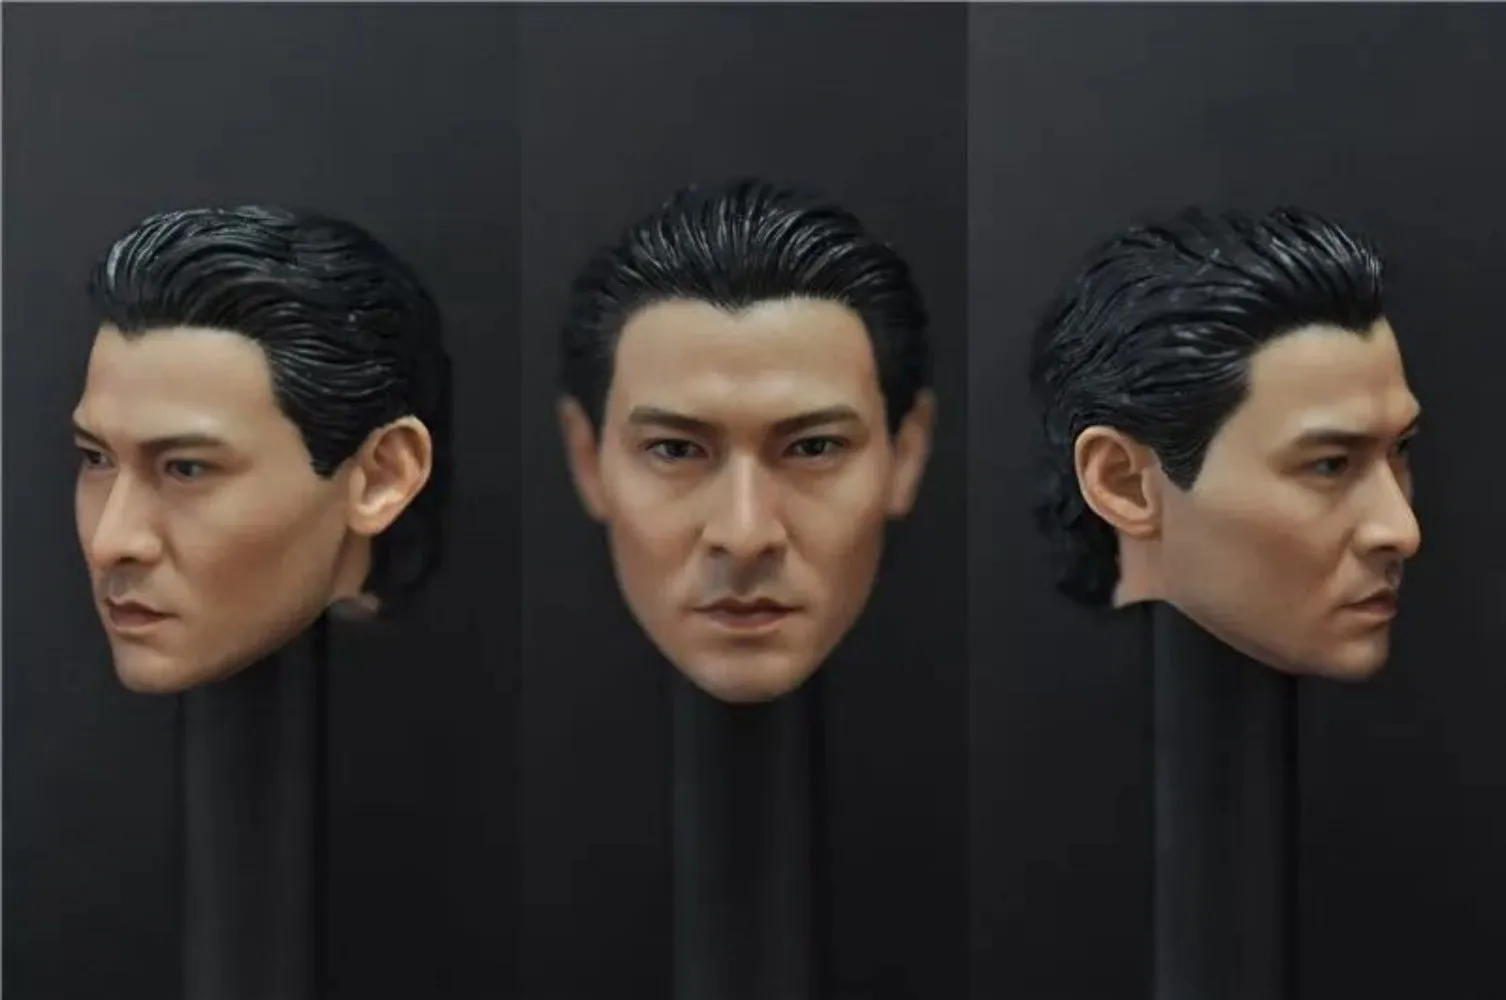 

Andy Lau UnPainted Male Head Carving Soldier Customized Actor Star Model 1/6 Scale TBleaague Action Figure Body Doll Toy